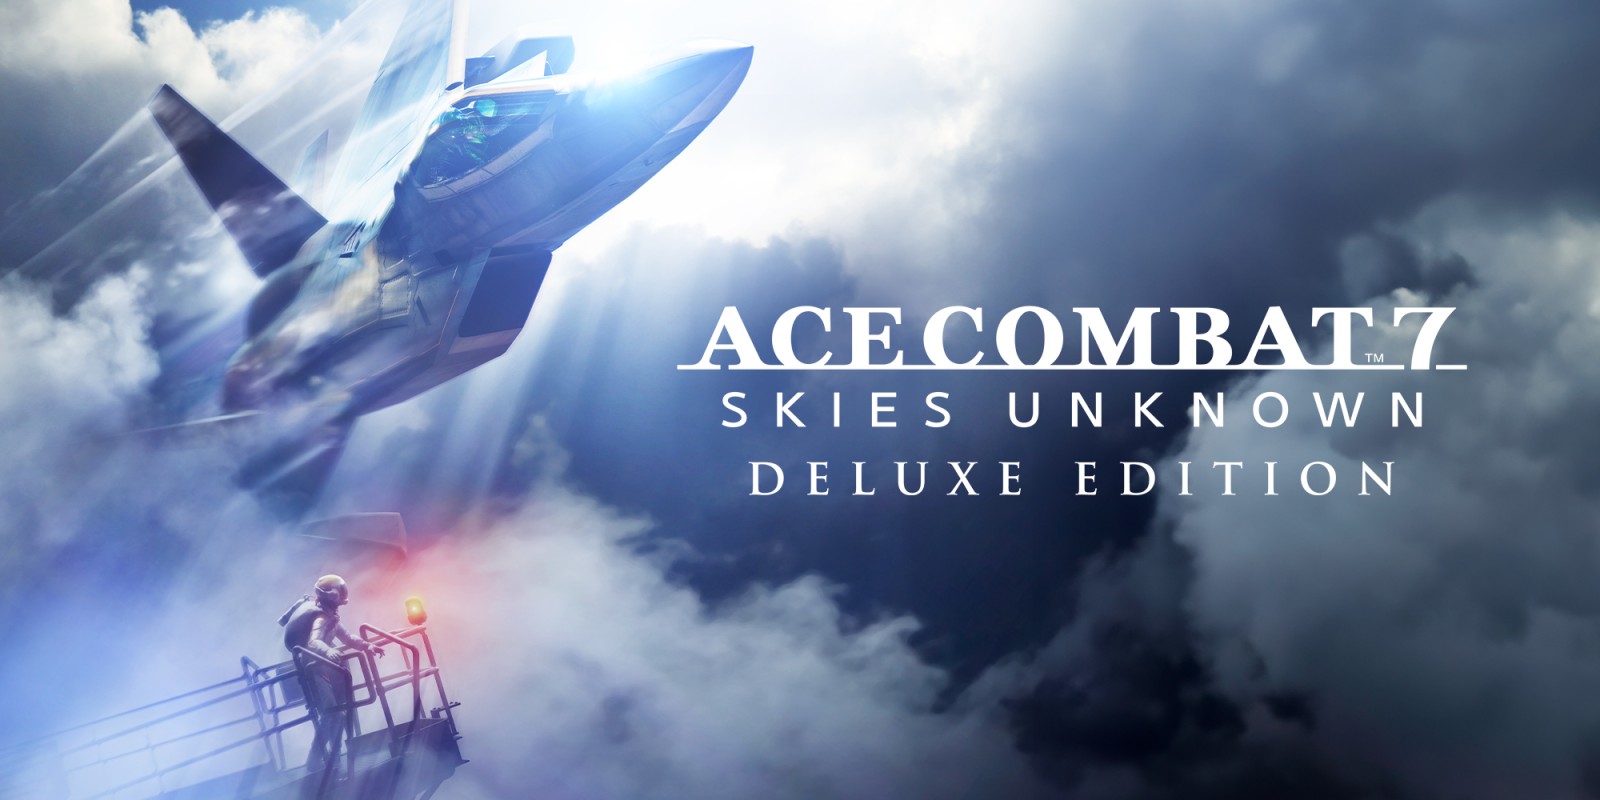 ACE COMBAT™7: SKIES UNKNOWN DELUXE EDITION